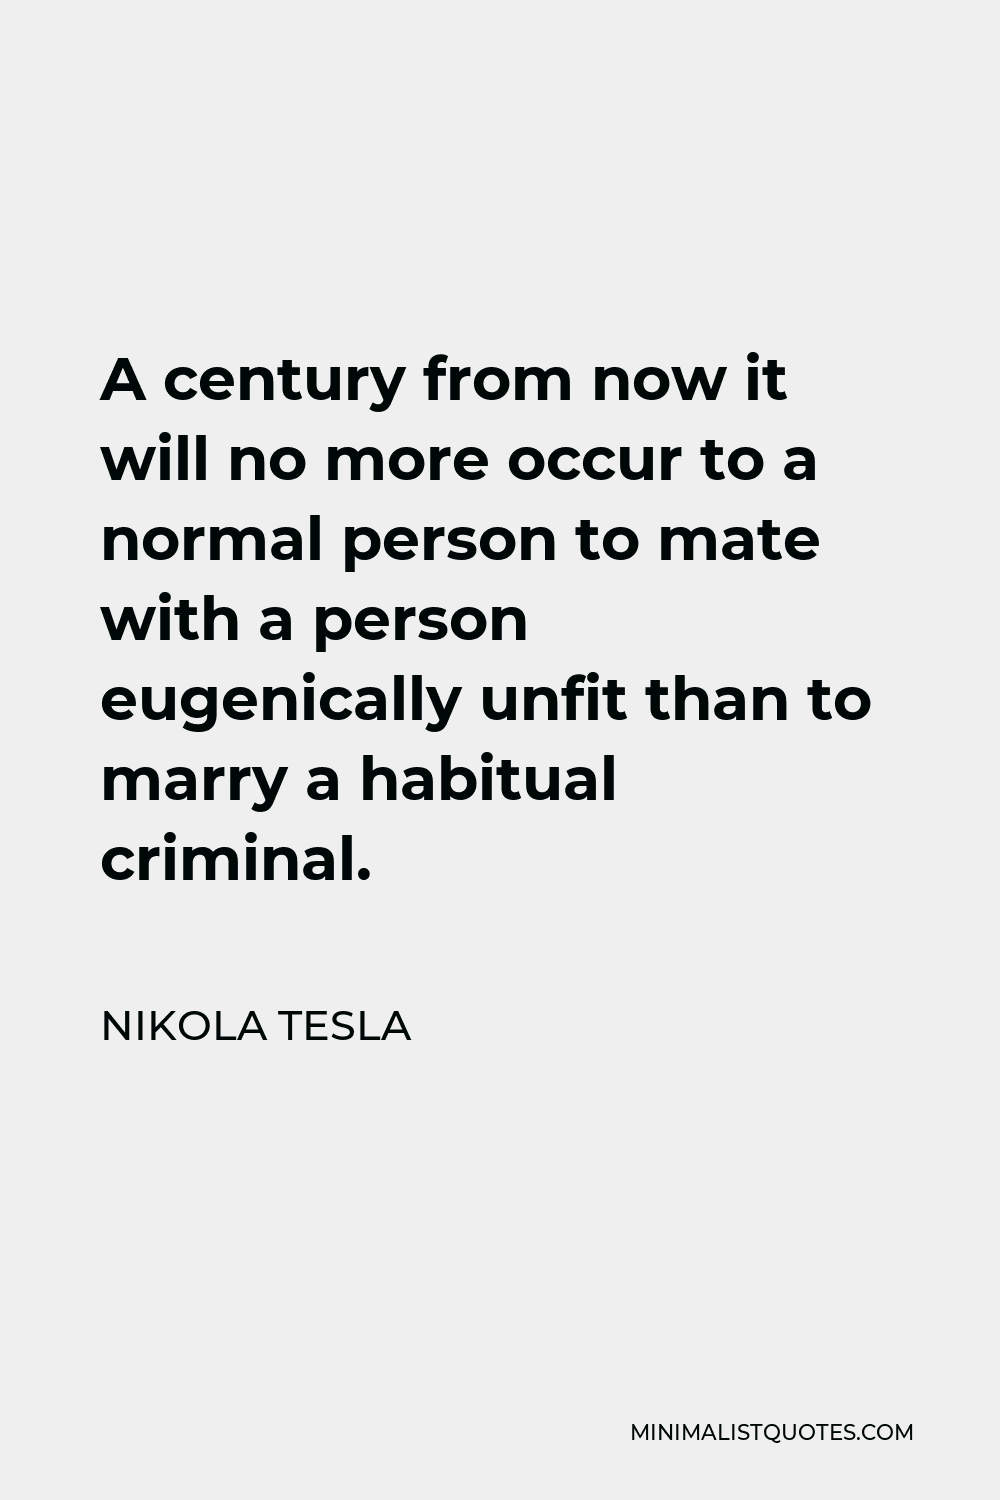 Nikola Tesla Quote - A century from now it will no more occur to a normal person to mate with a person eugenically unfit than to marry a habitual criminal.